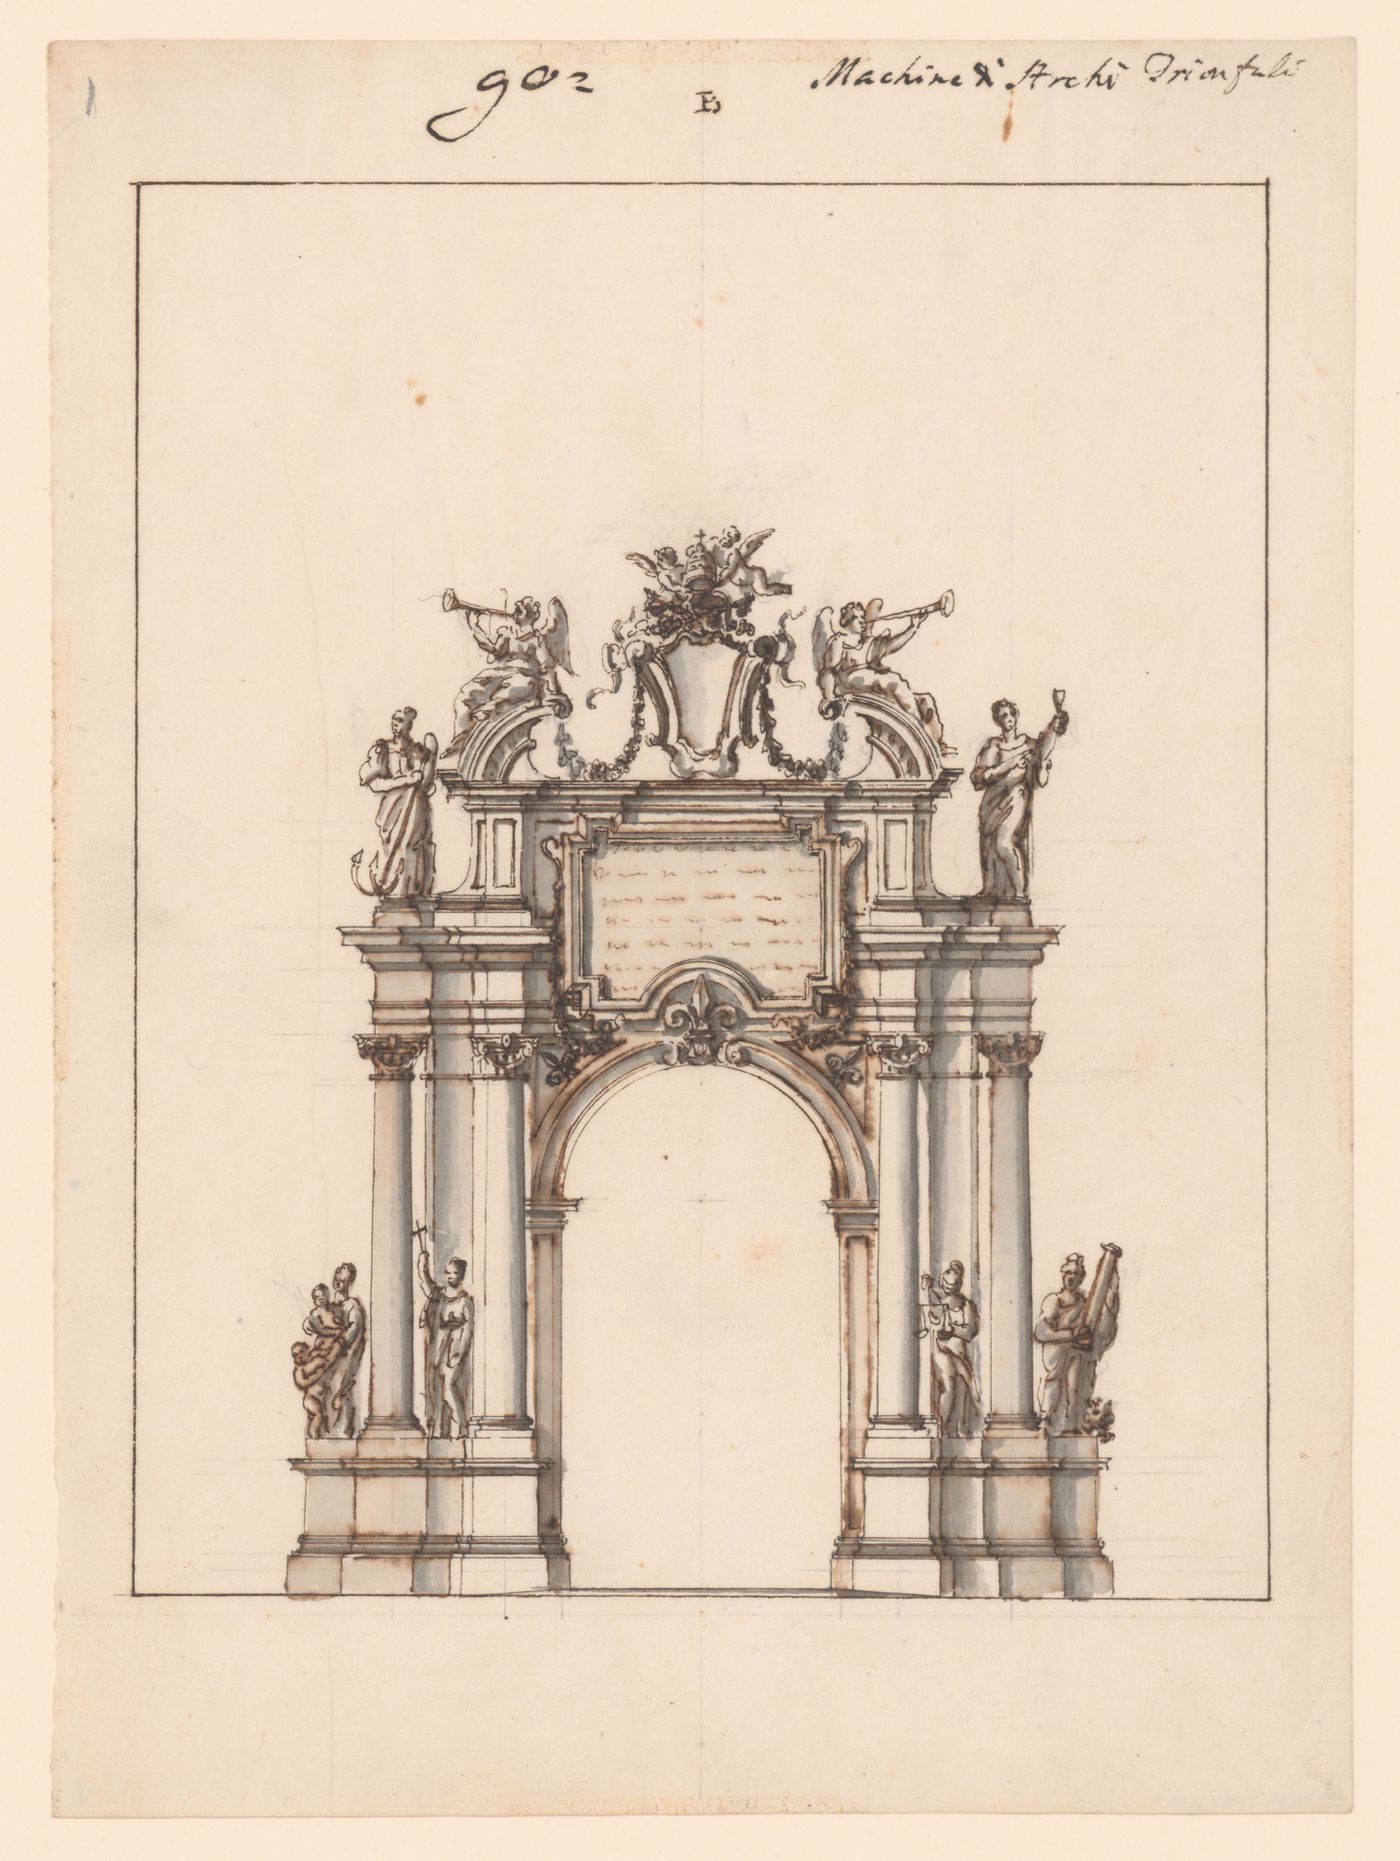 Elevation for a triumphal arch for the possesso of Innocent XIII, Rome